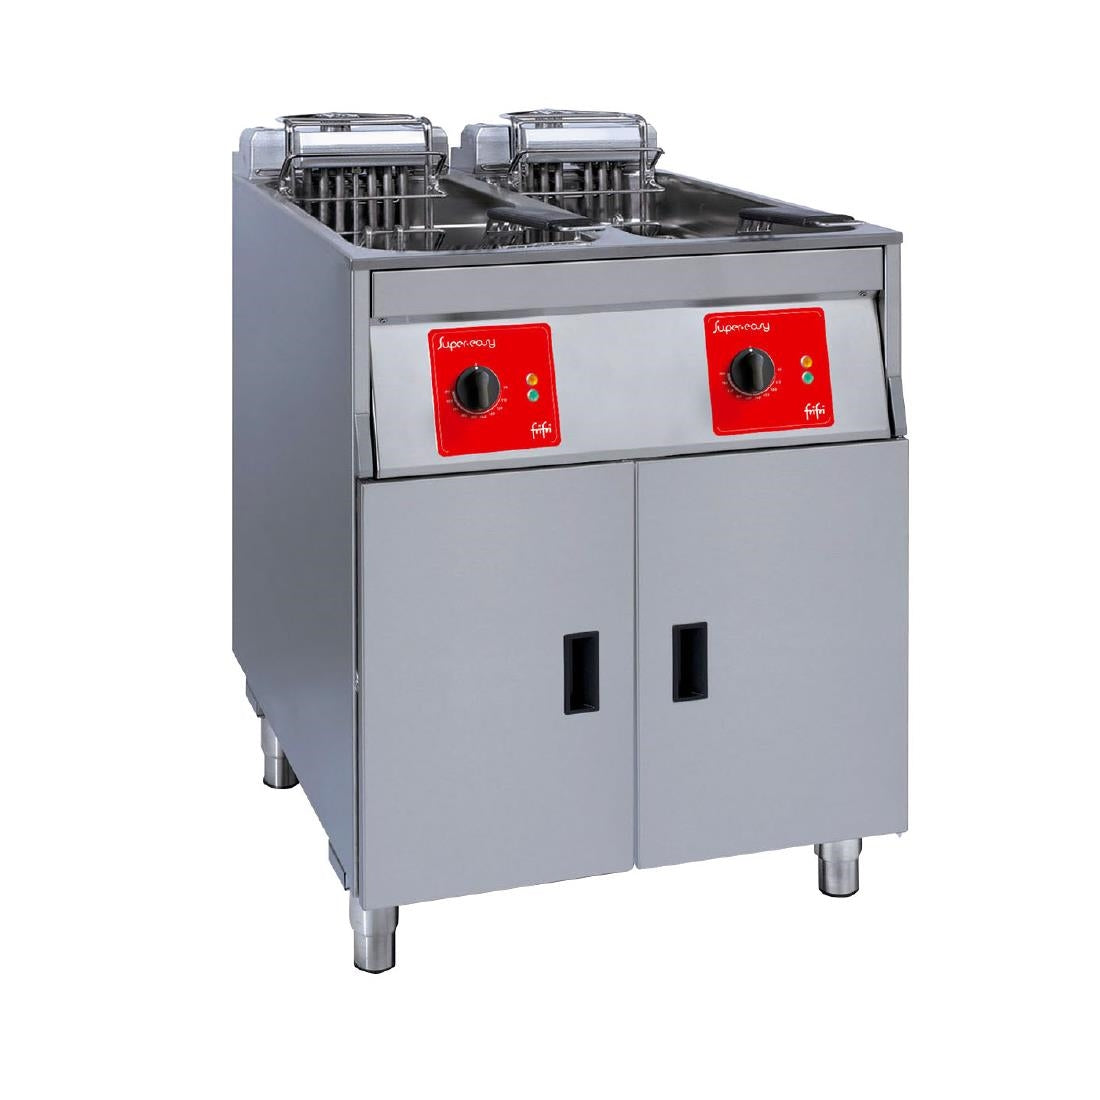 HS069-3PH FriFri Super Easy 622 Electric Free-standing Fryer Twin Tank Twin Baskets with Filtration 2x11.4kW Three Phase SL622L31G0